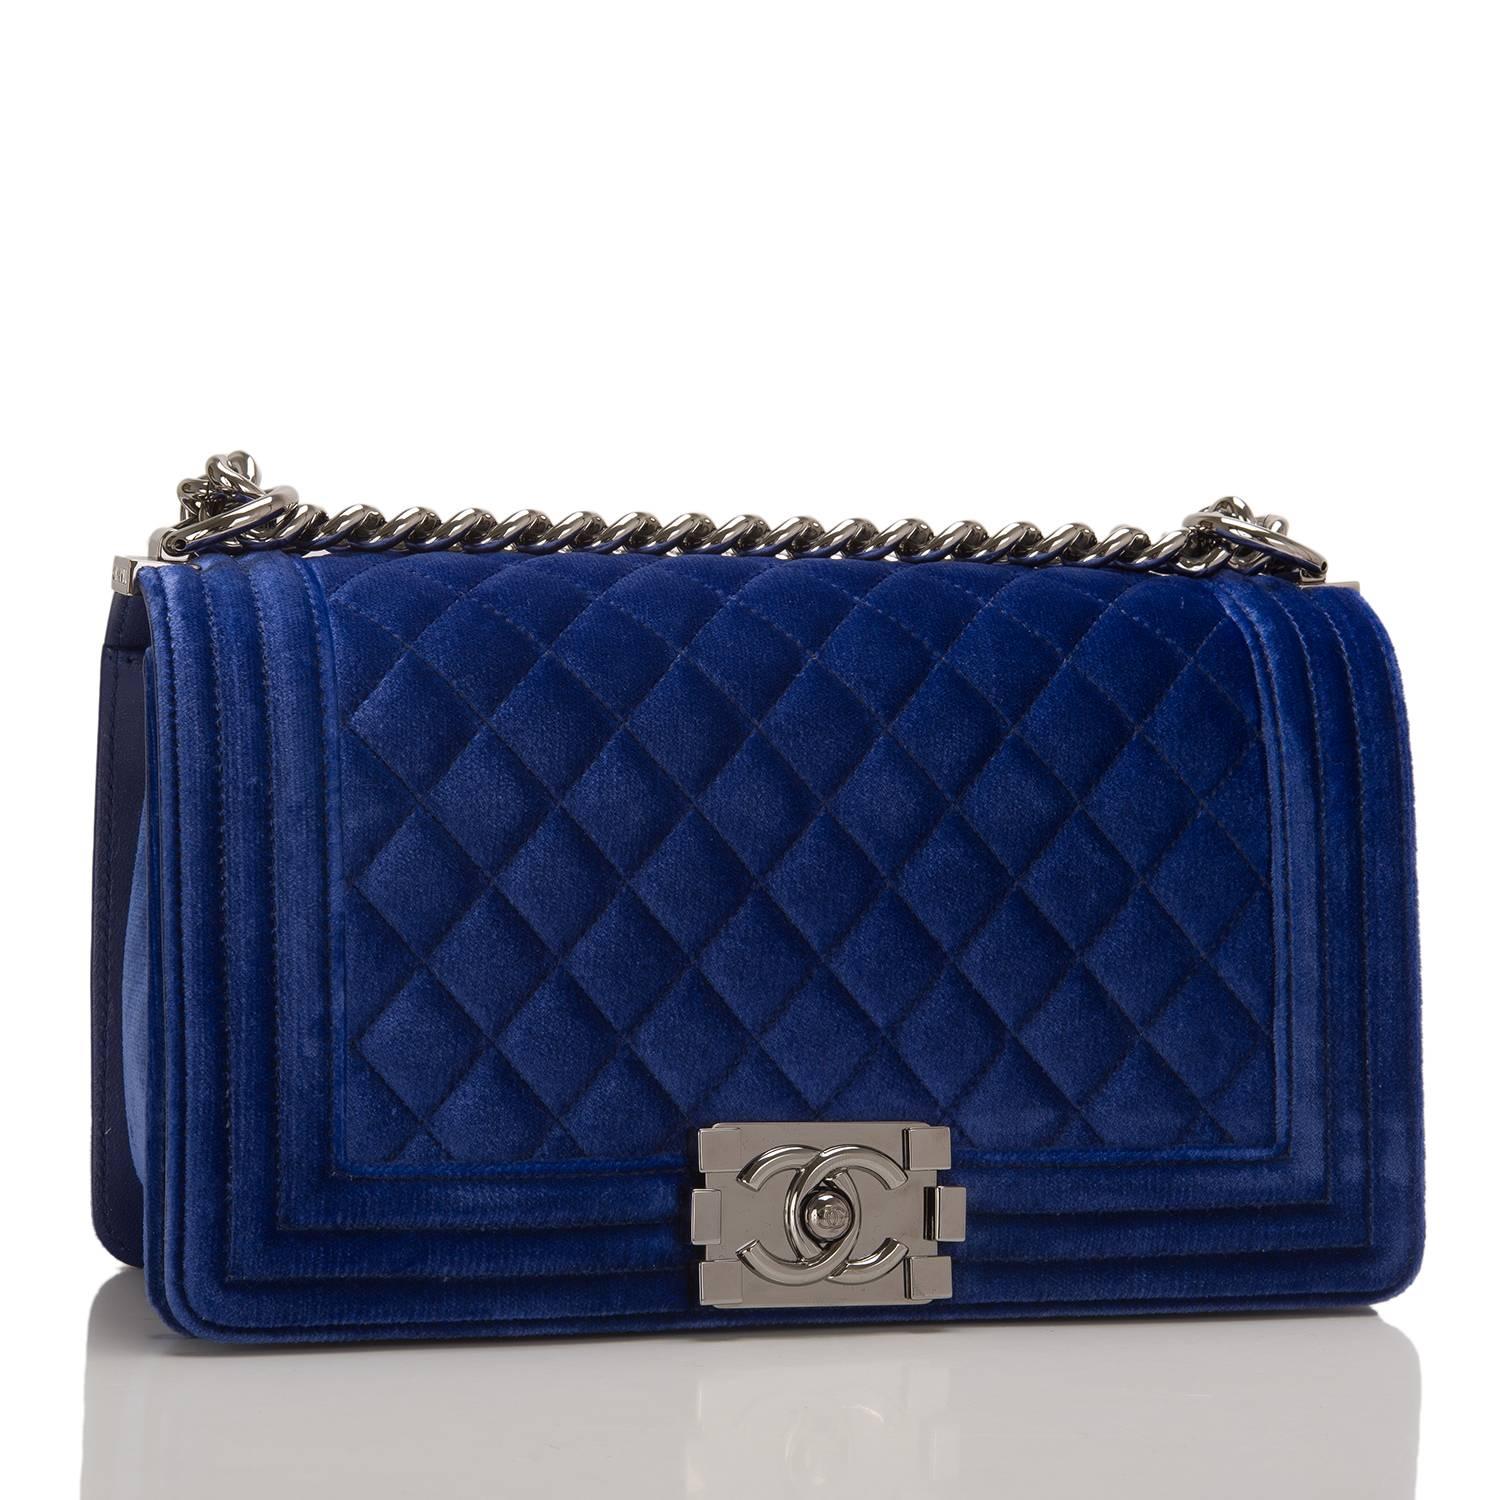 Chanel Medium Boy bag of blue velvet with ruthenium hardware.

This bag features a front flap with Le Boy CC push lock closure and a ruthenium chain link with blue leather padded shoulder strap.

The interior is lined in blue fabric with an open